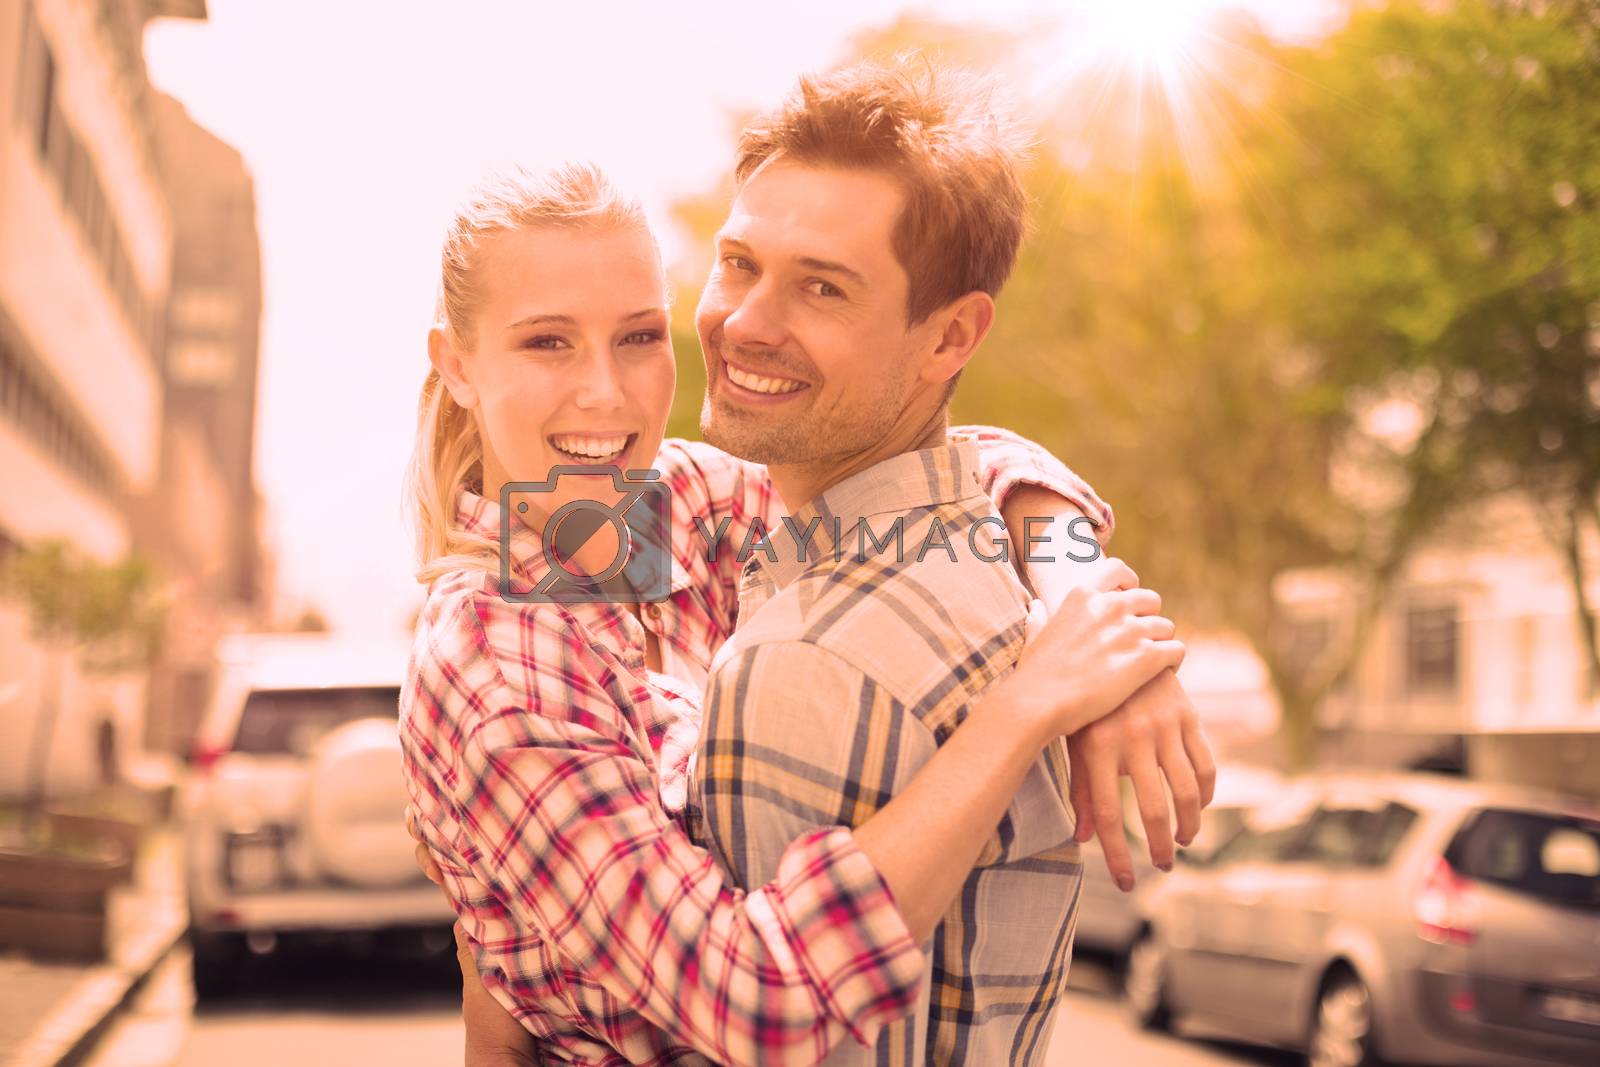 Royalty free image of Couple in check shirts and denim hugging each other by Wavebreakmedia